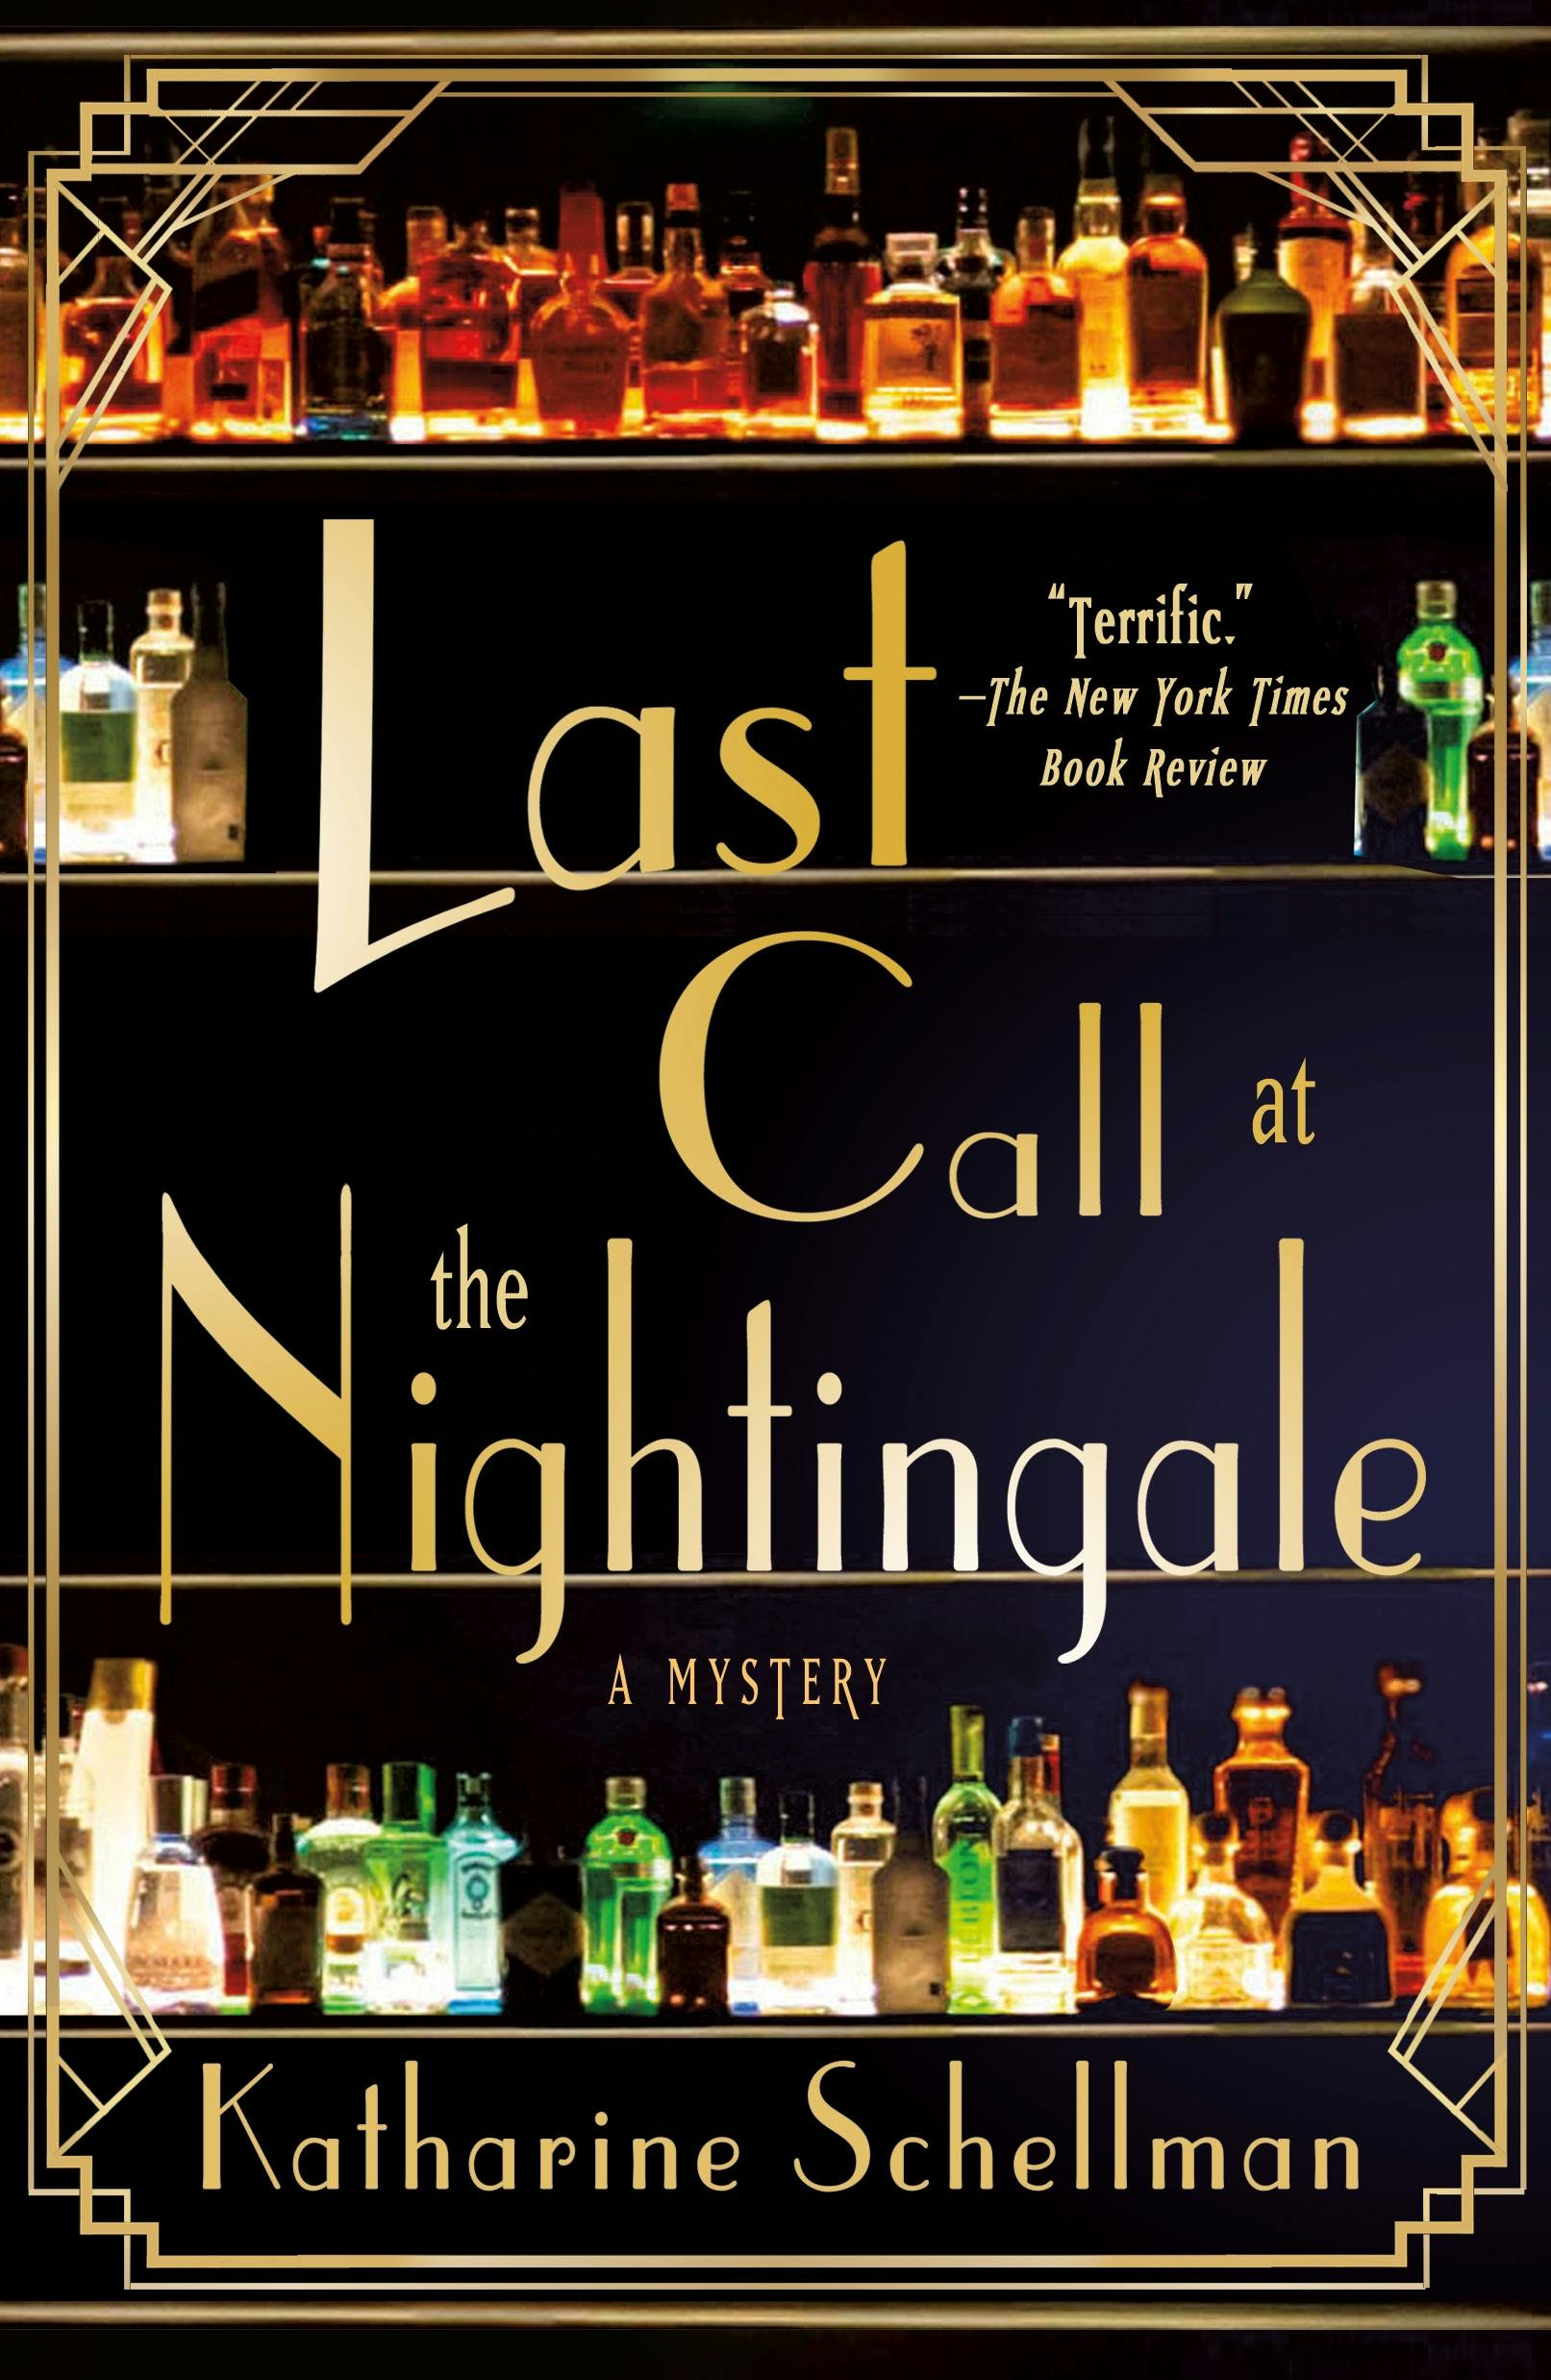 Book Highlight: Last Call at the Nightingale by Katharine